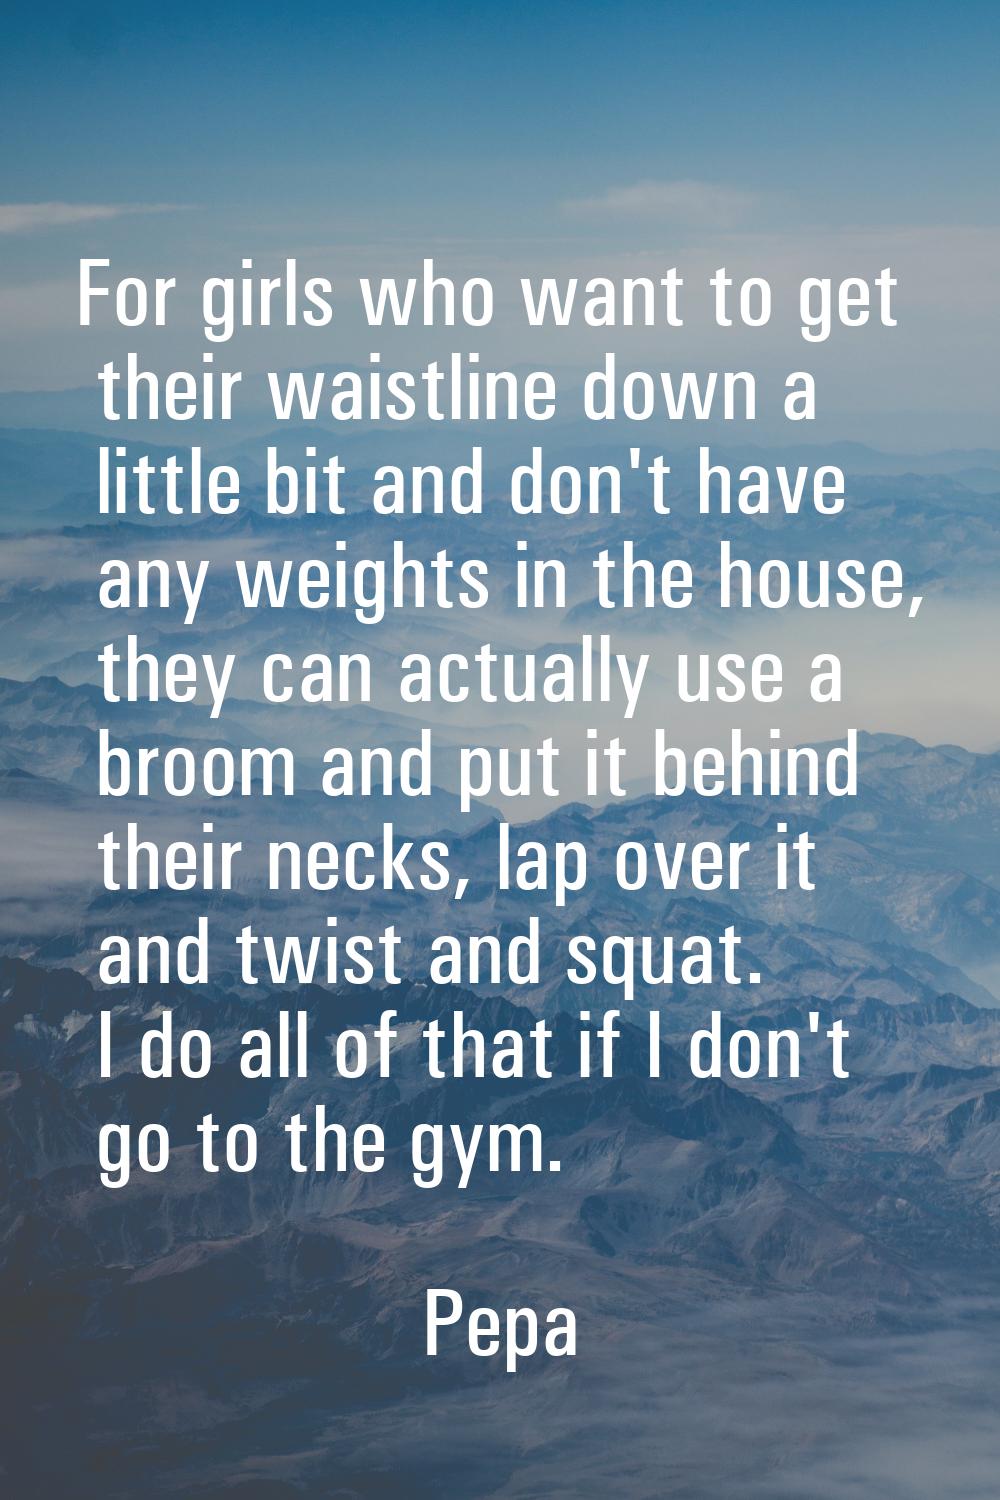 For girls who want to get their waistline down a little bit and don't have any weights in the house